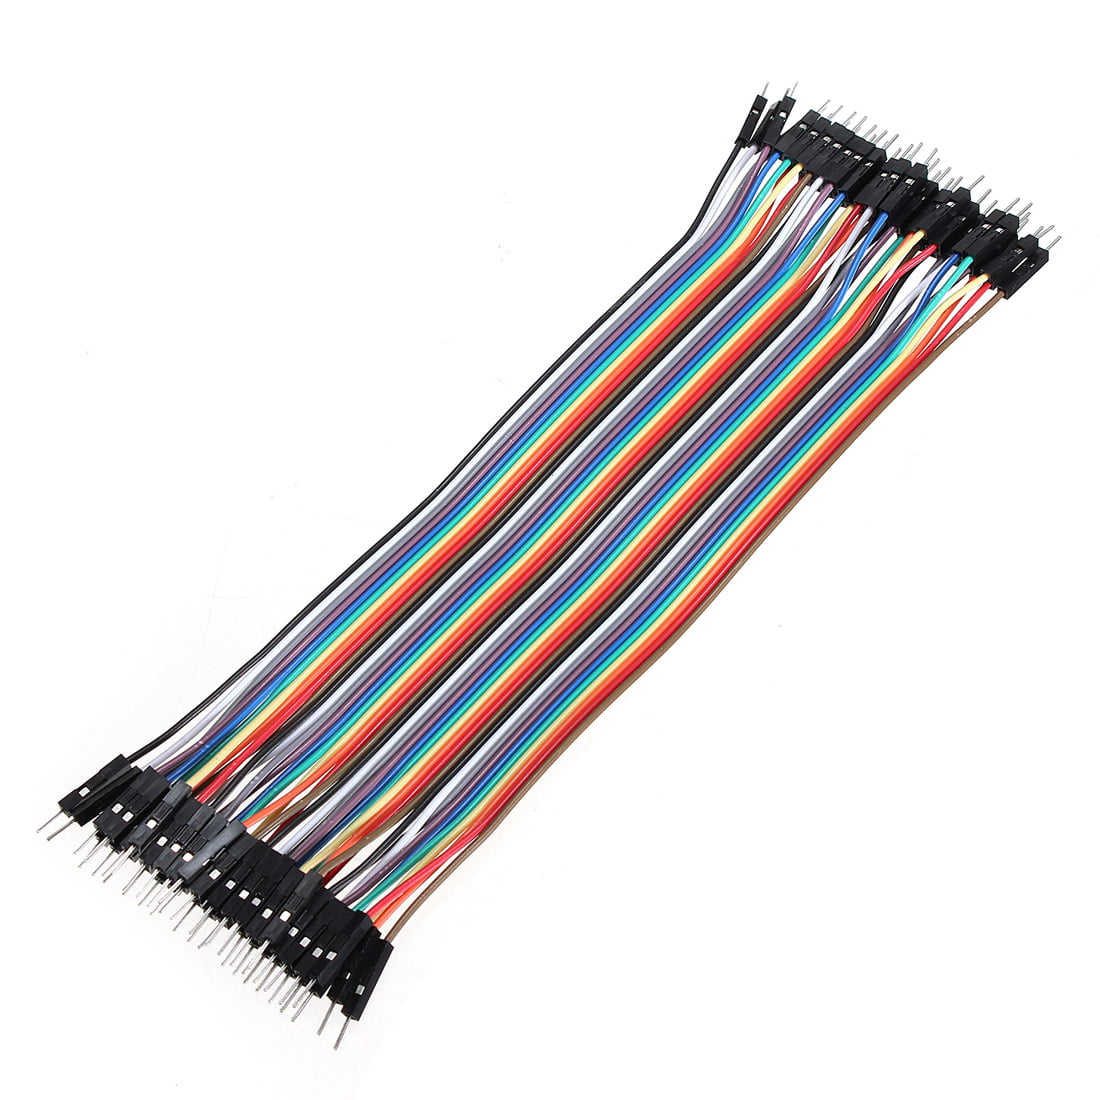 40PCS 20cm 2.54mm Female to Female Dupont Cable Jumper Wire 1P-1P For Arduino